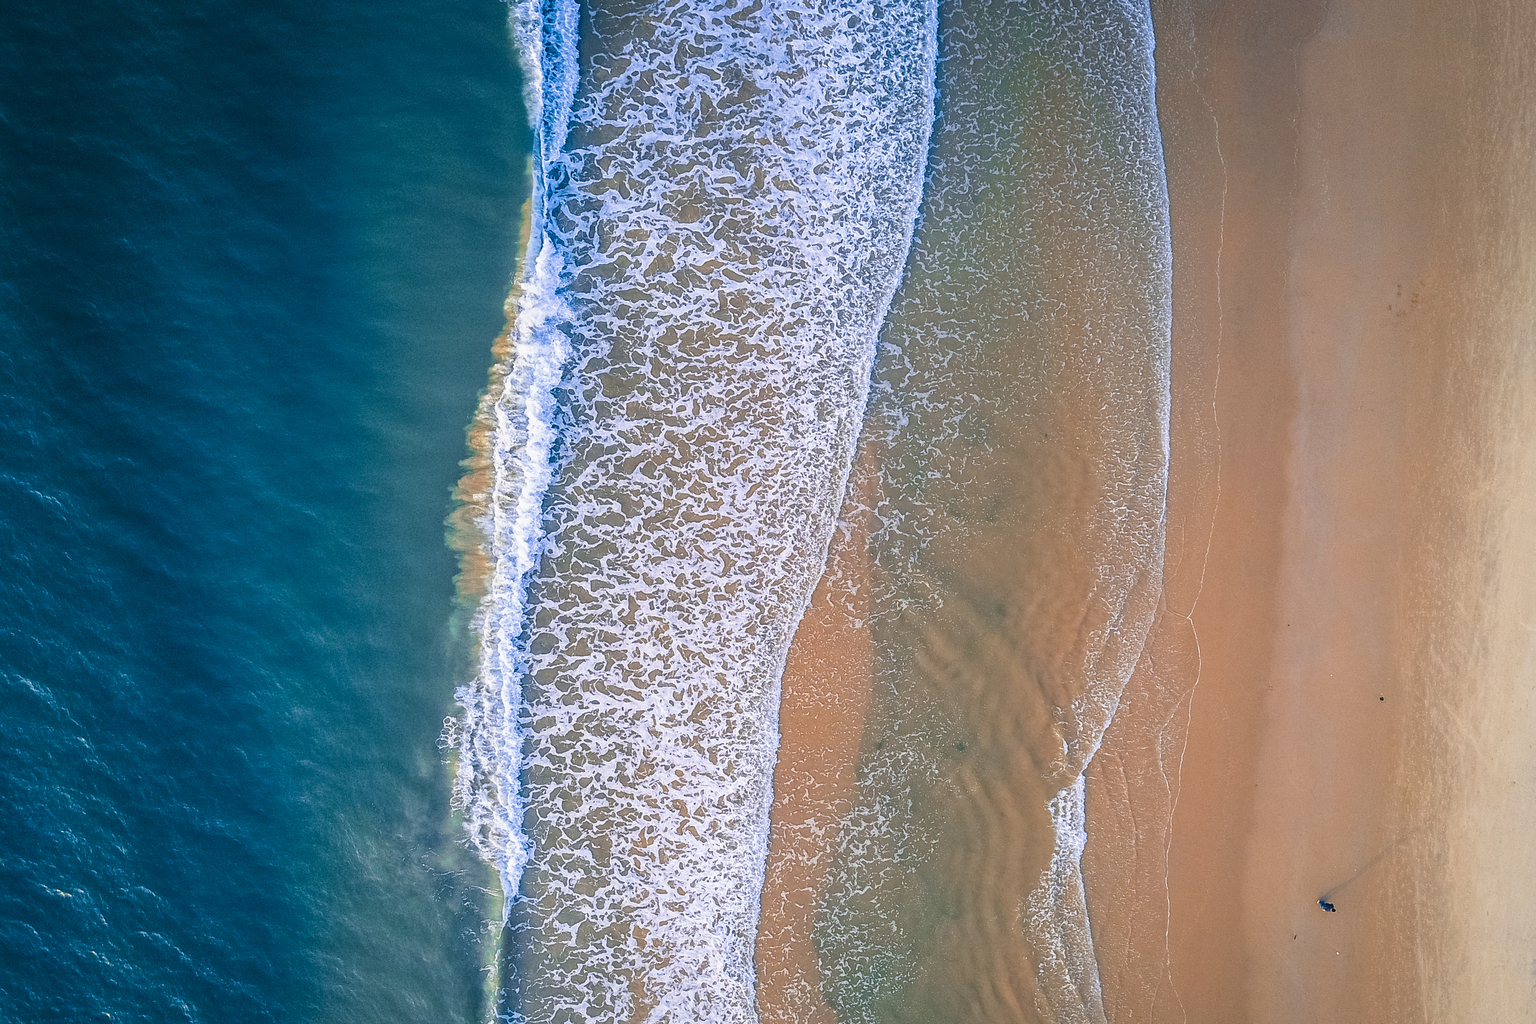 Aerial view of coastline with beach and ocean waves, taken by drone